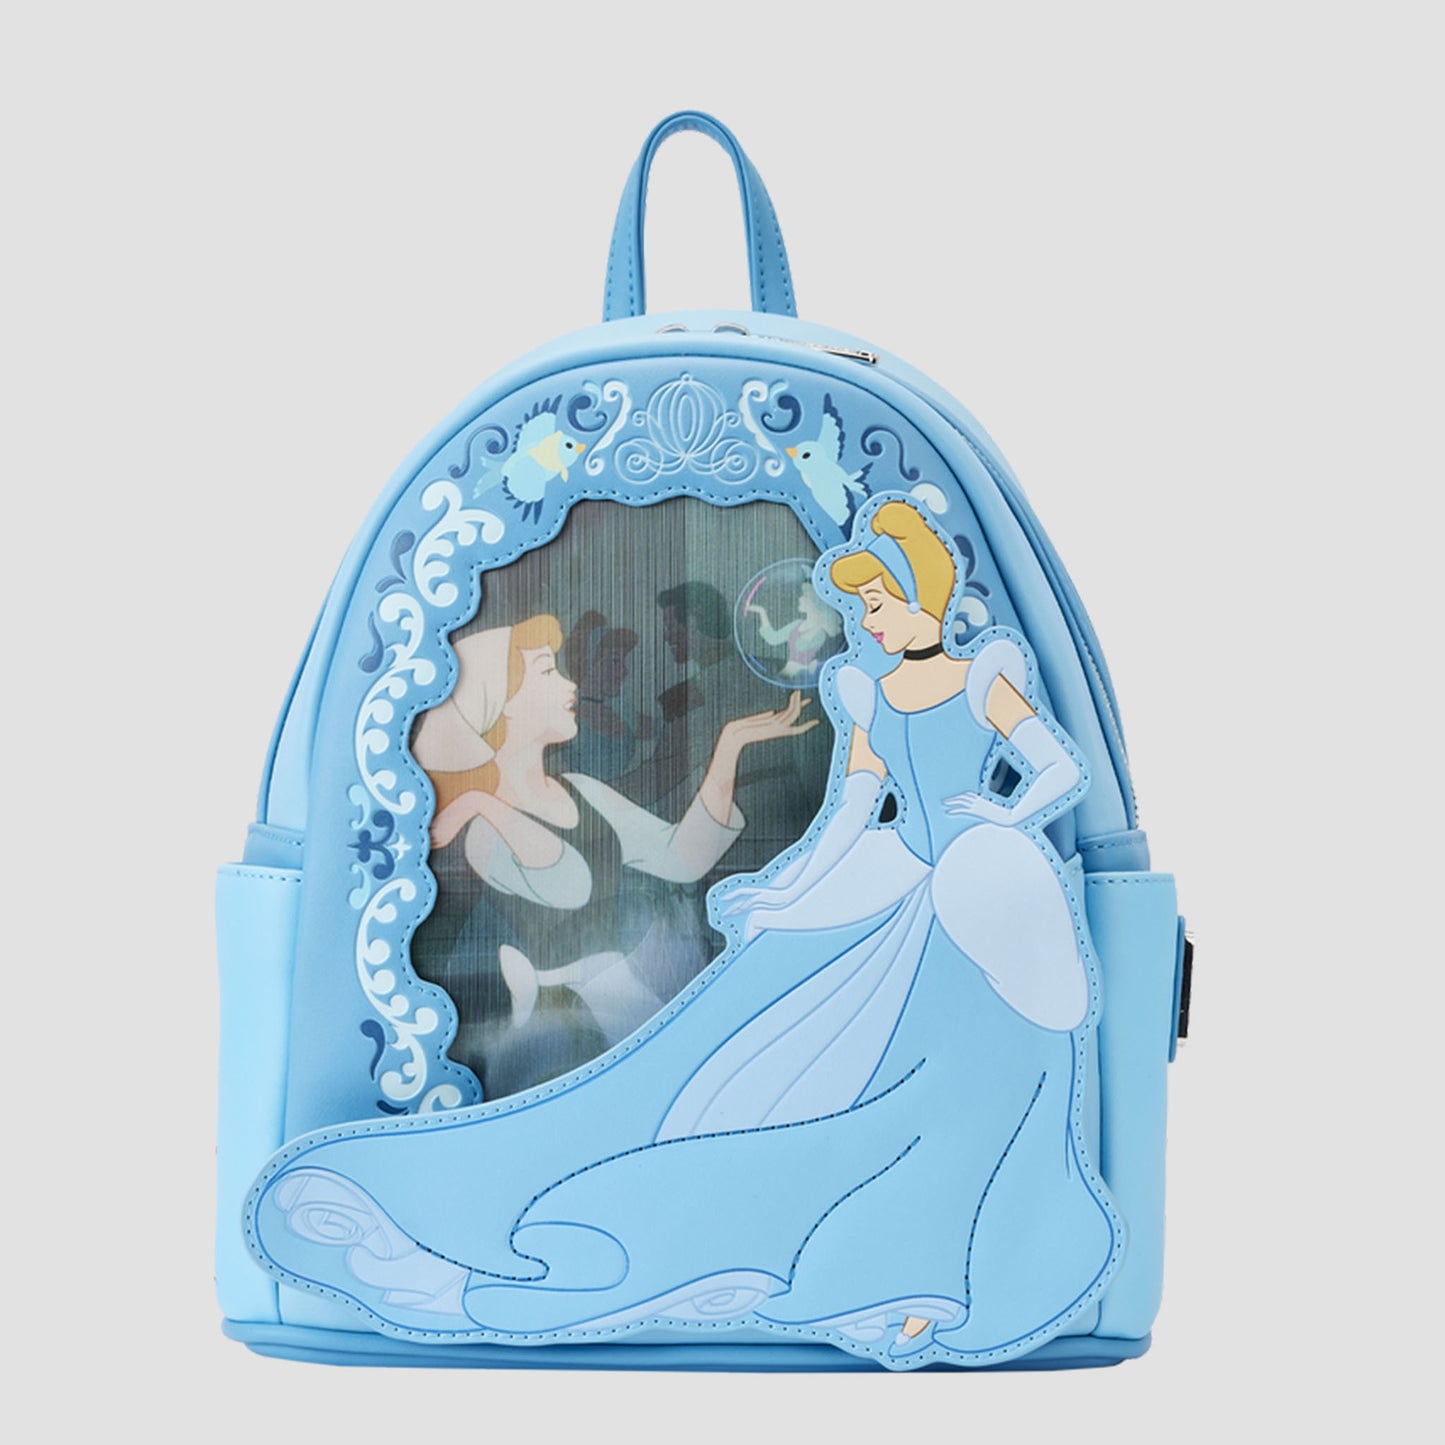 Cinderella (Disney) Lenticular Princess Series Mini Backpack by Loungefly